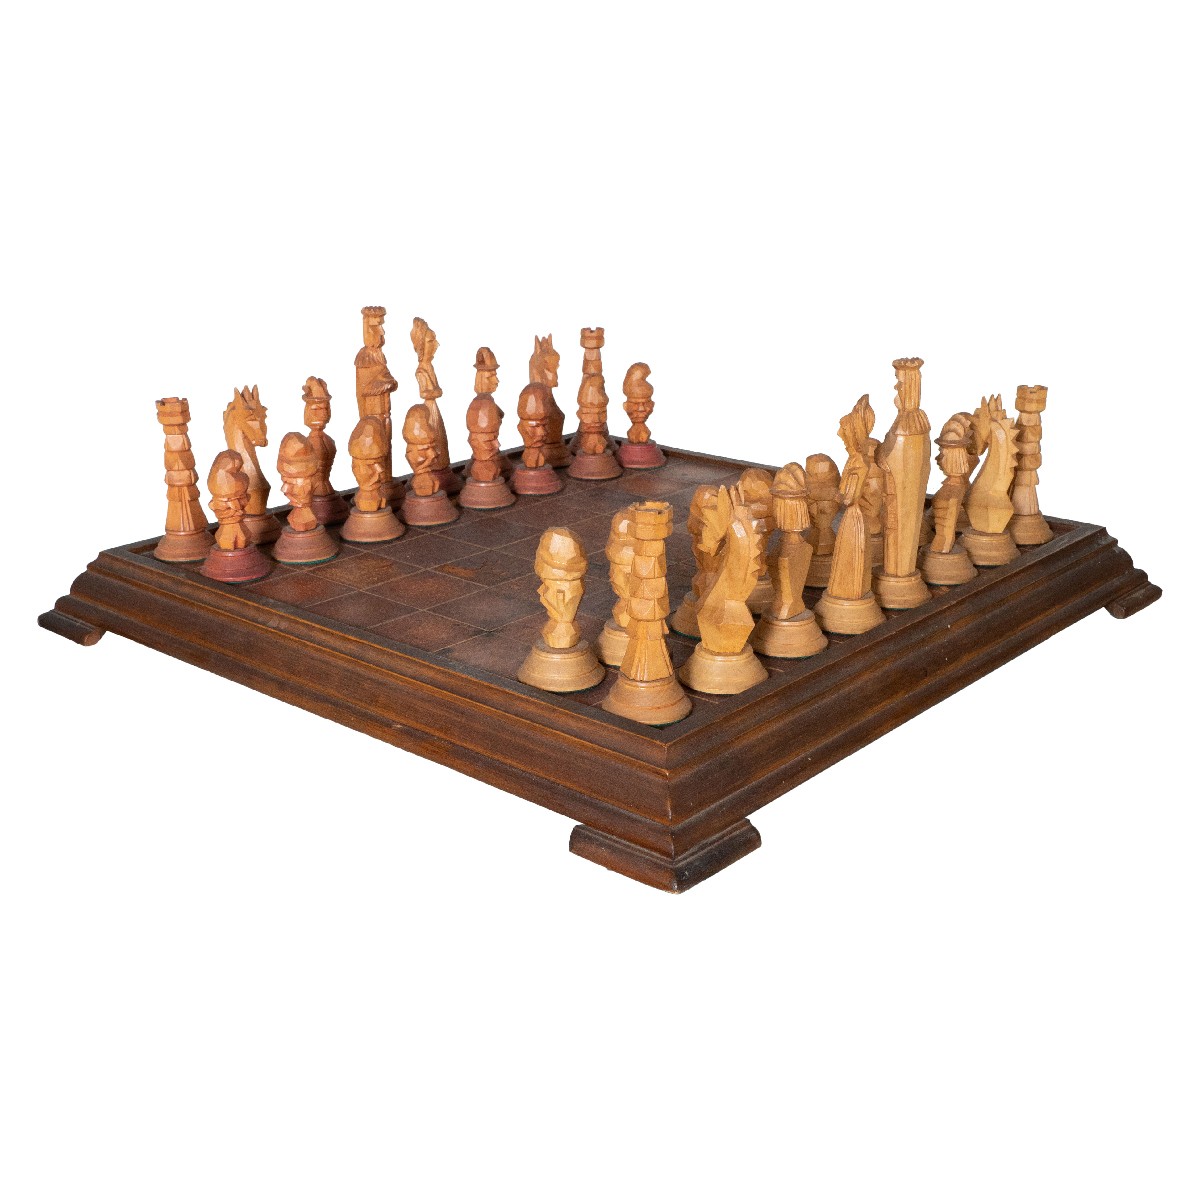 Hand-carved wood and leather chess set